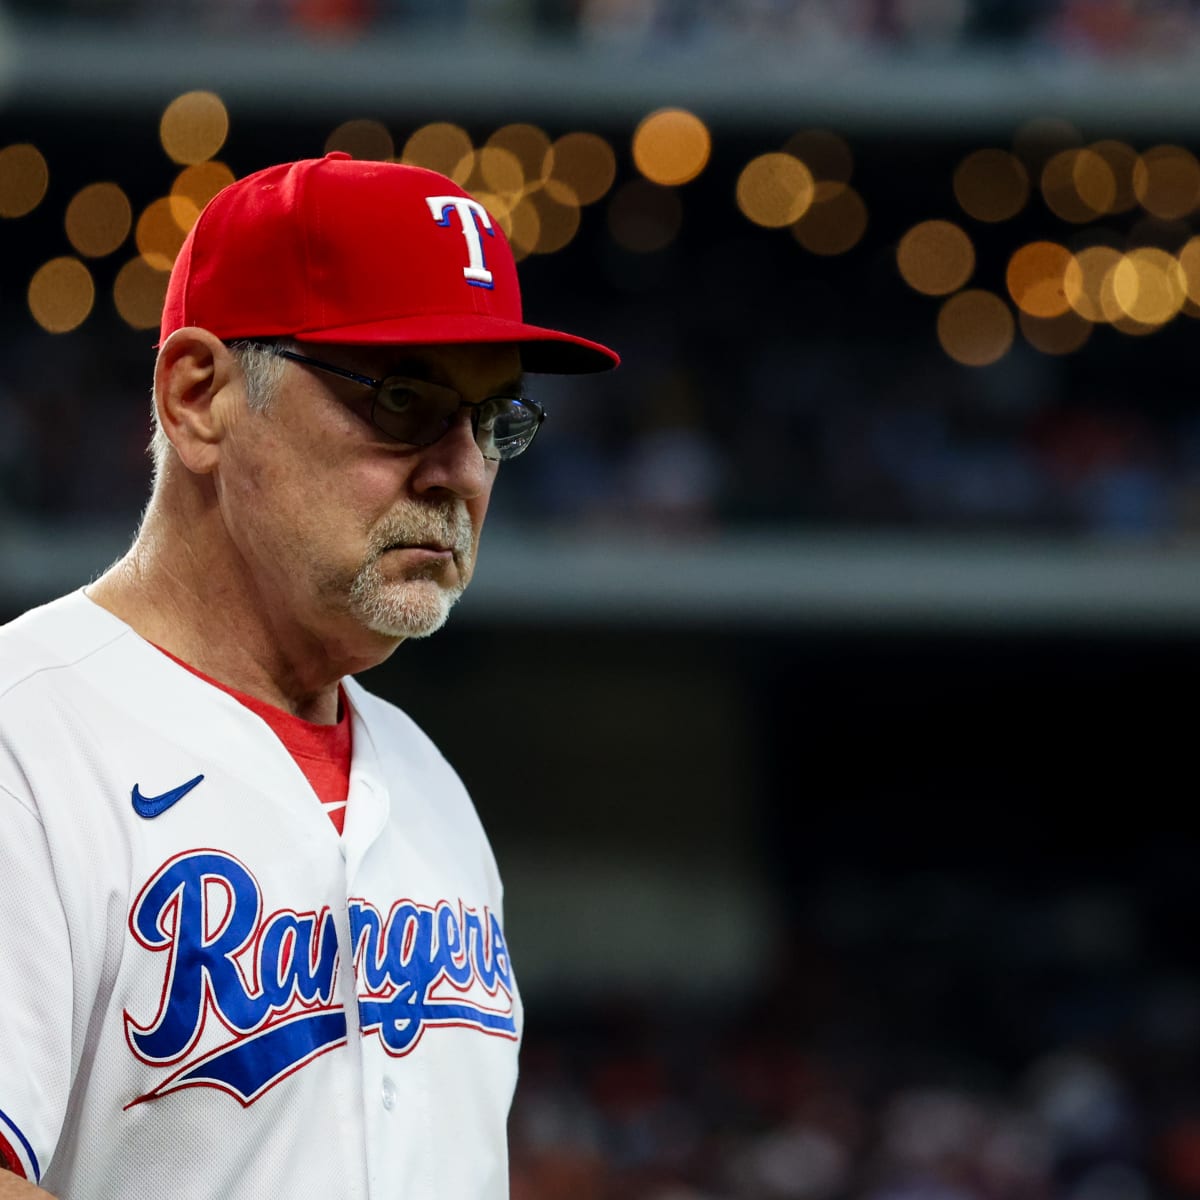 Manager Bruce Bochy Calls Out Texas Rangers For Not Being 'Locked